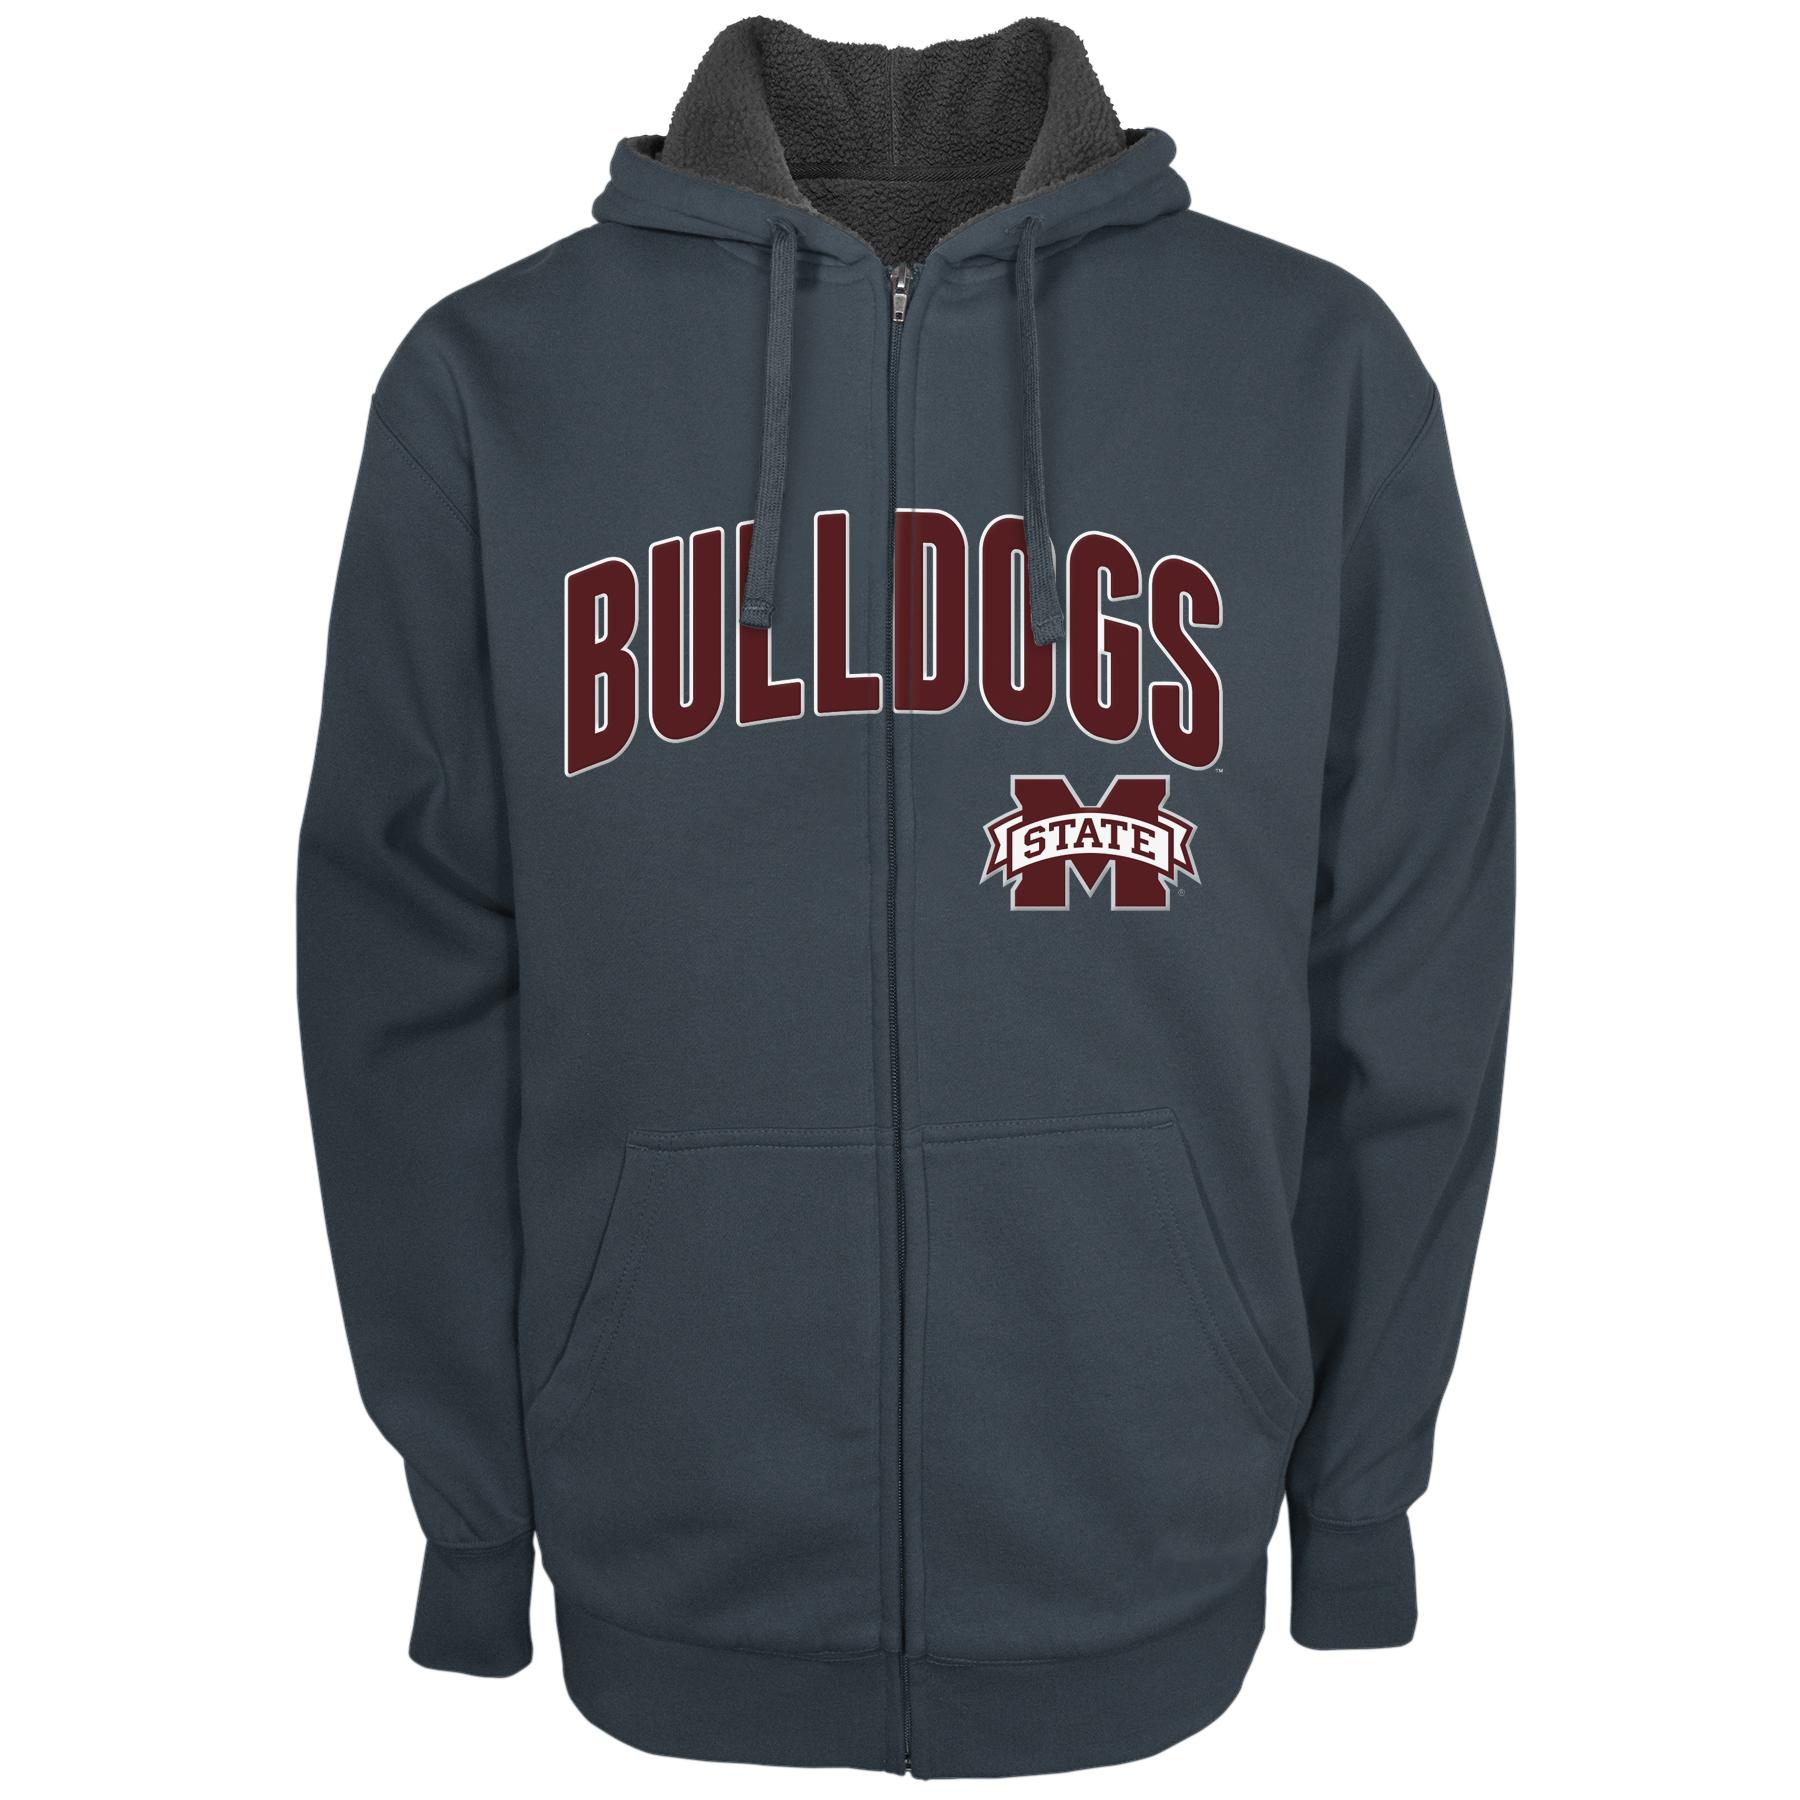 NCAA Men's Lined Hoodie Jacket - Mississippi State University Bulldogs